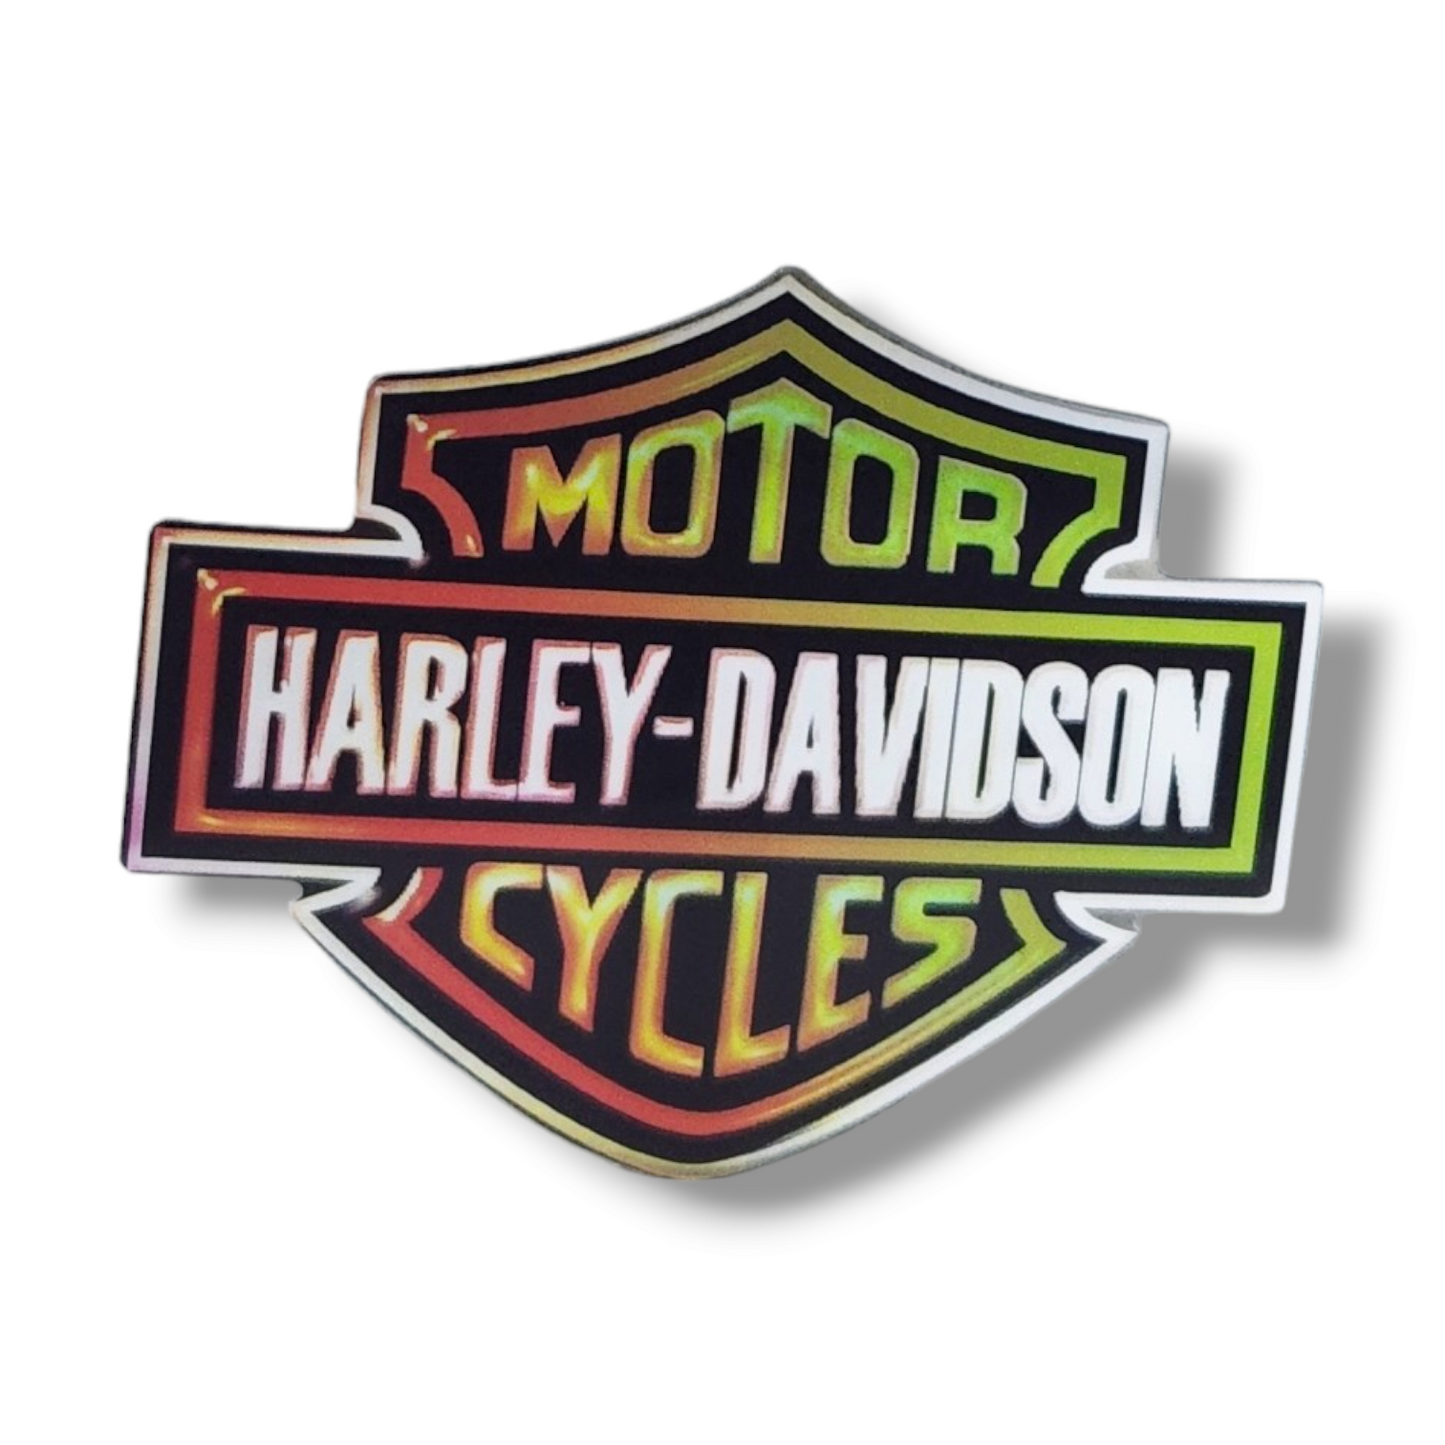 BRAND LABEL 3D Motion Stickers